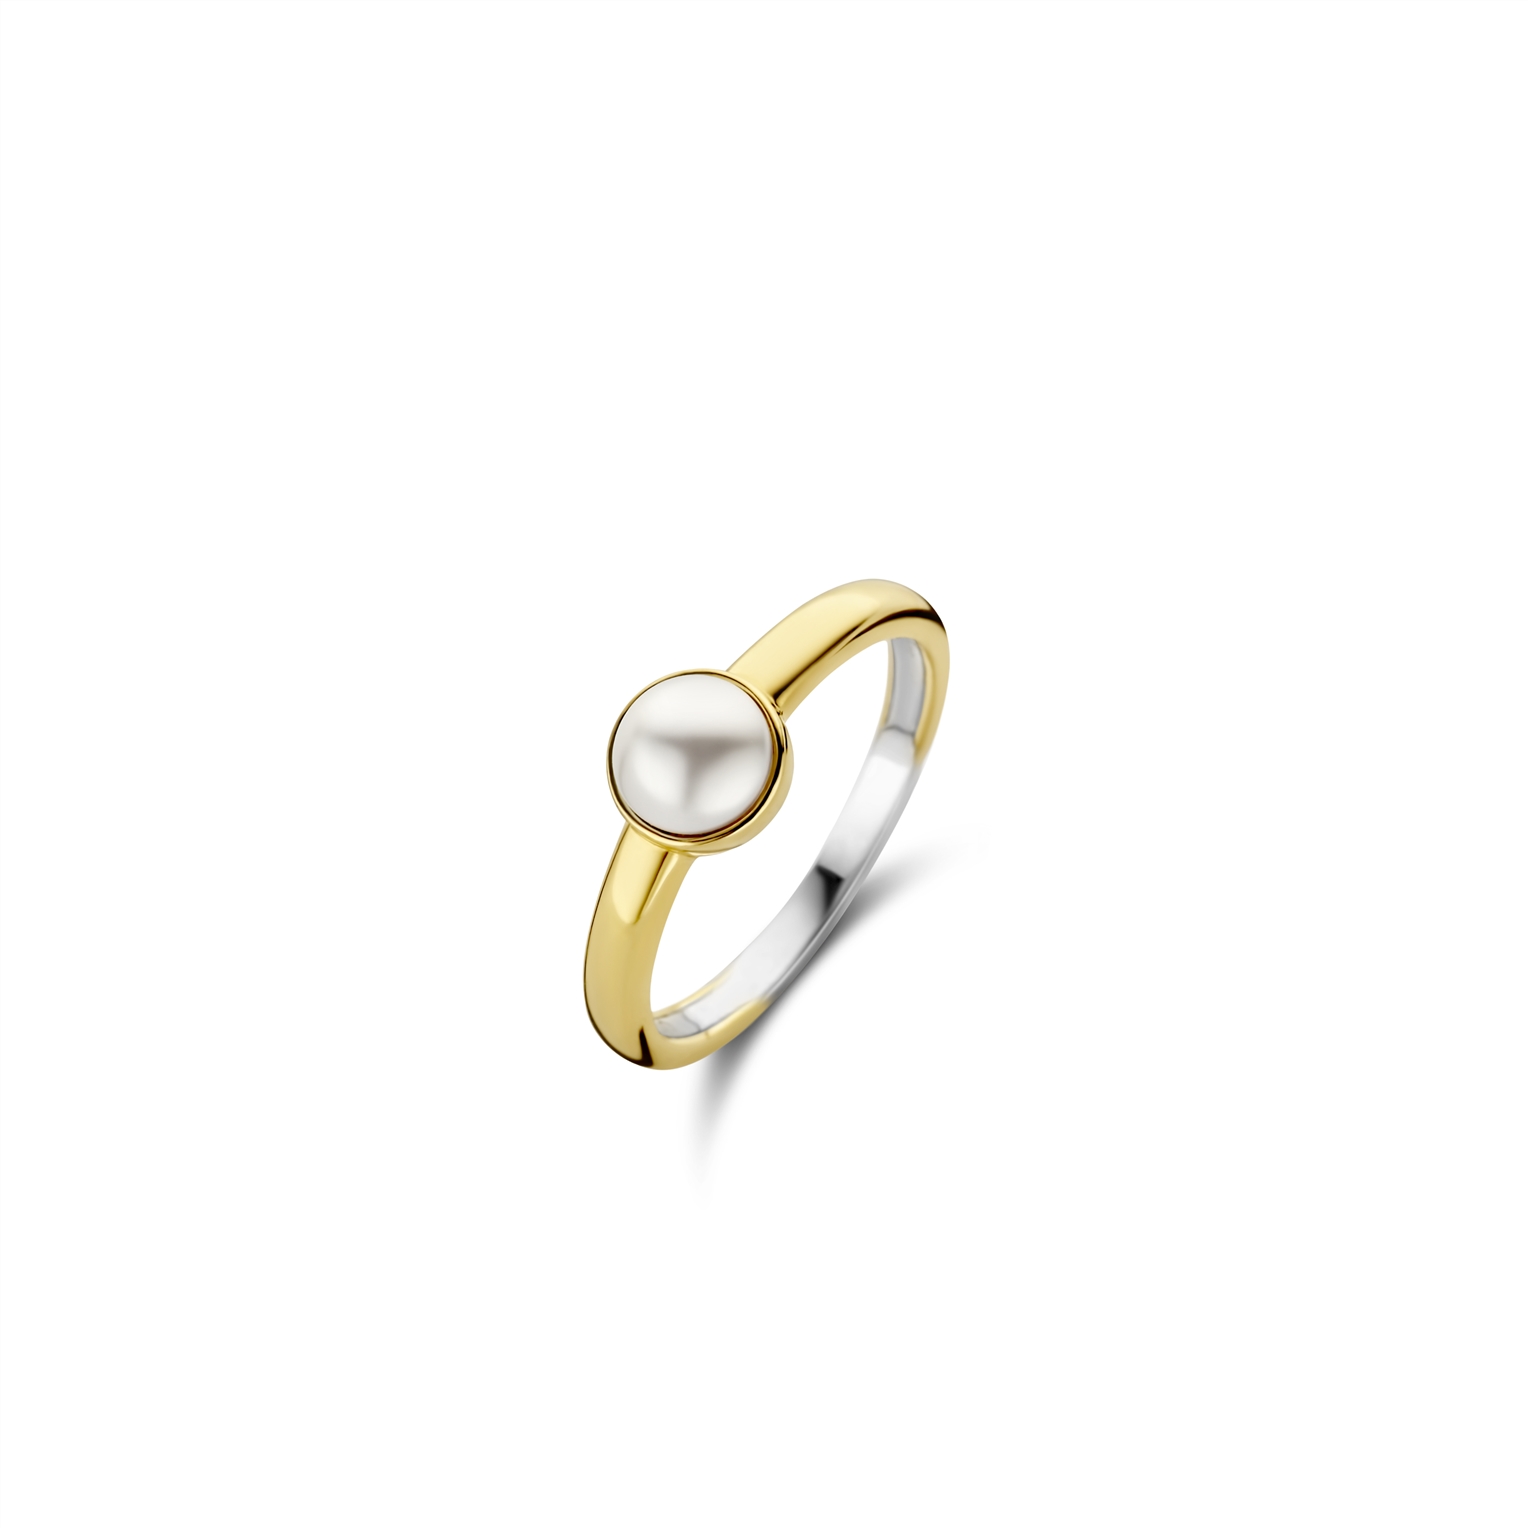 https://www.fallers.com/wp-content/uploads/sites/3/2022/03/Ti-Sento-gilded-Ring-with-pearl-in-rubover-setting-2.jpg